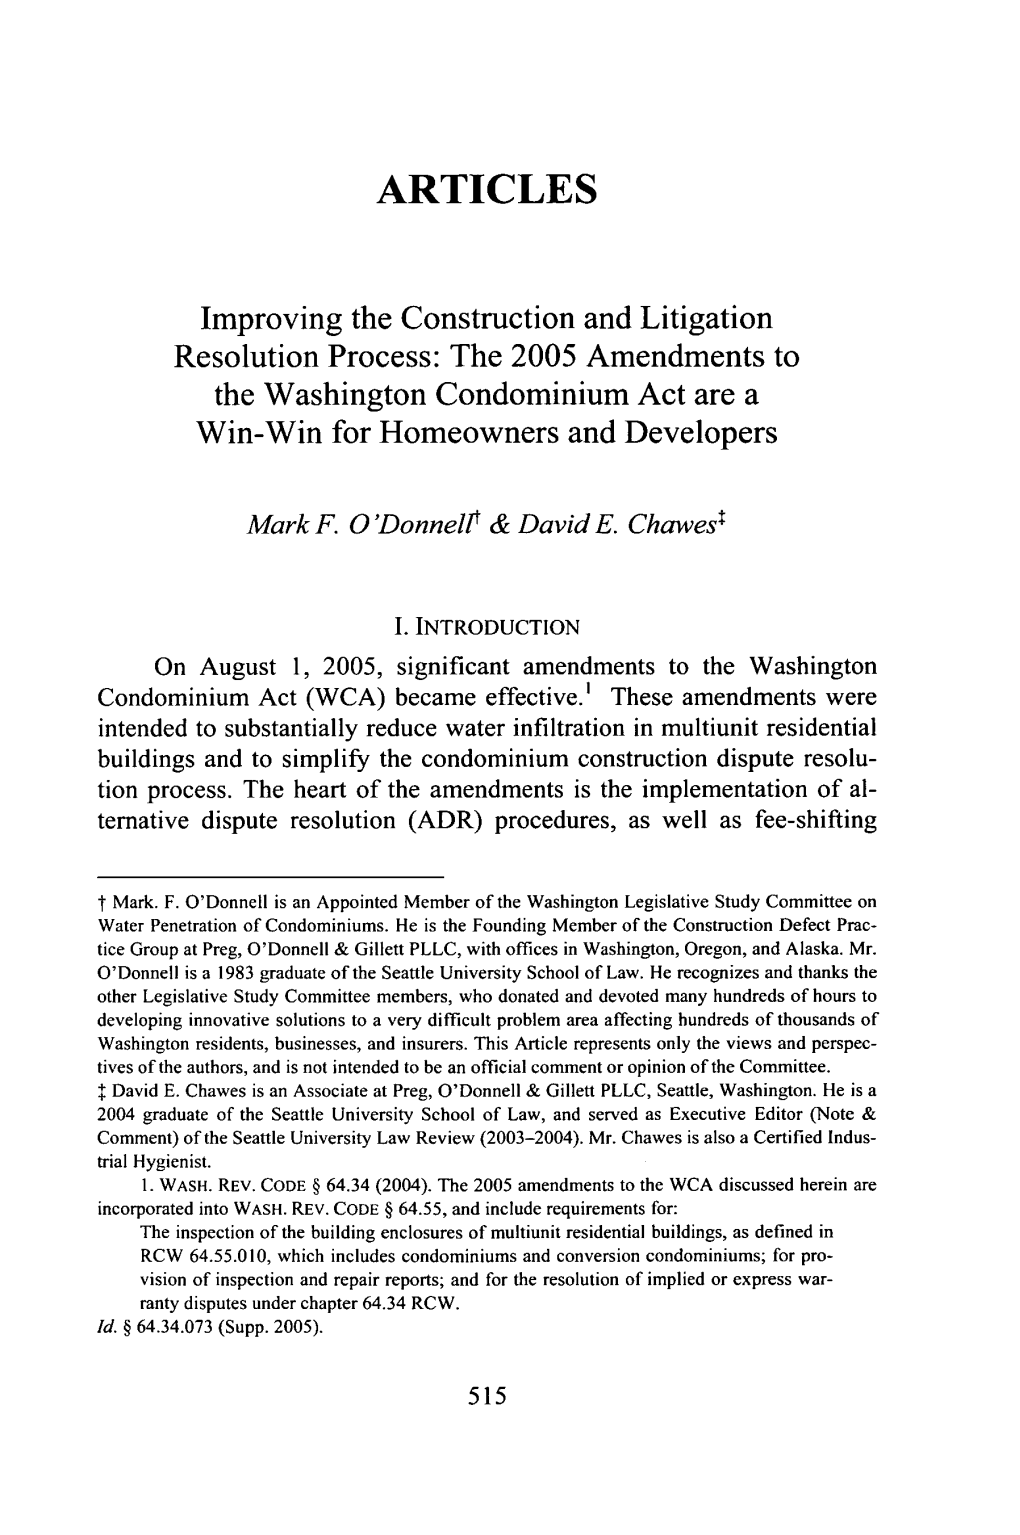 Improving the Construction and Litigation Resolution Process: the 2005 Amendments to the Washington Condominium Act Are a Win-Win for Homeowners and Developers